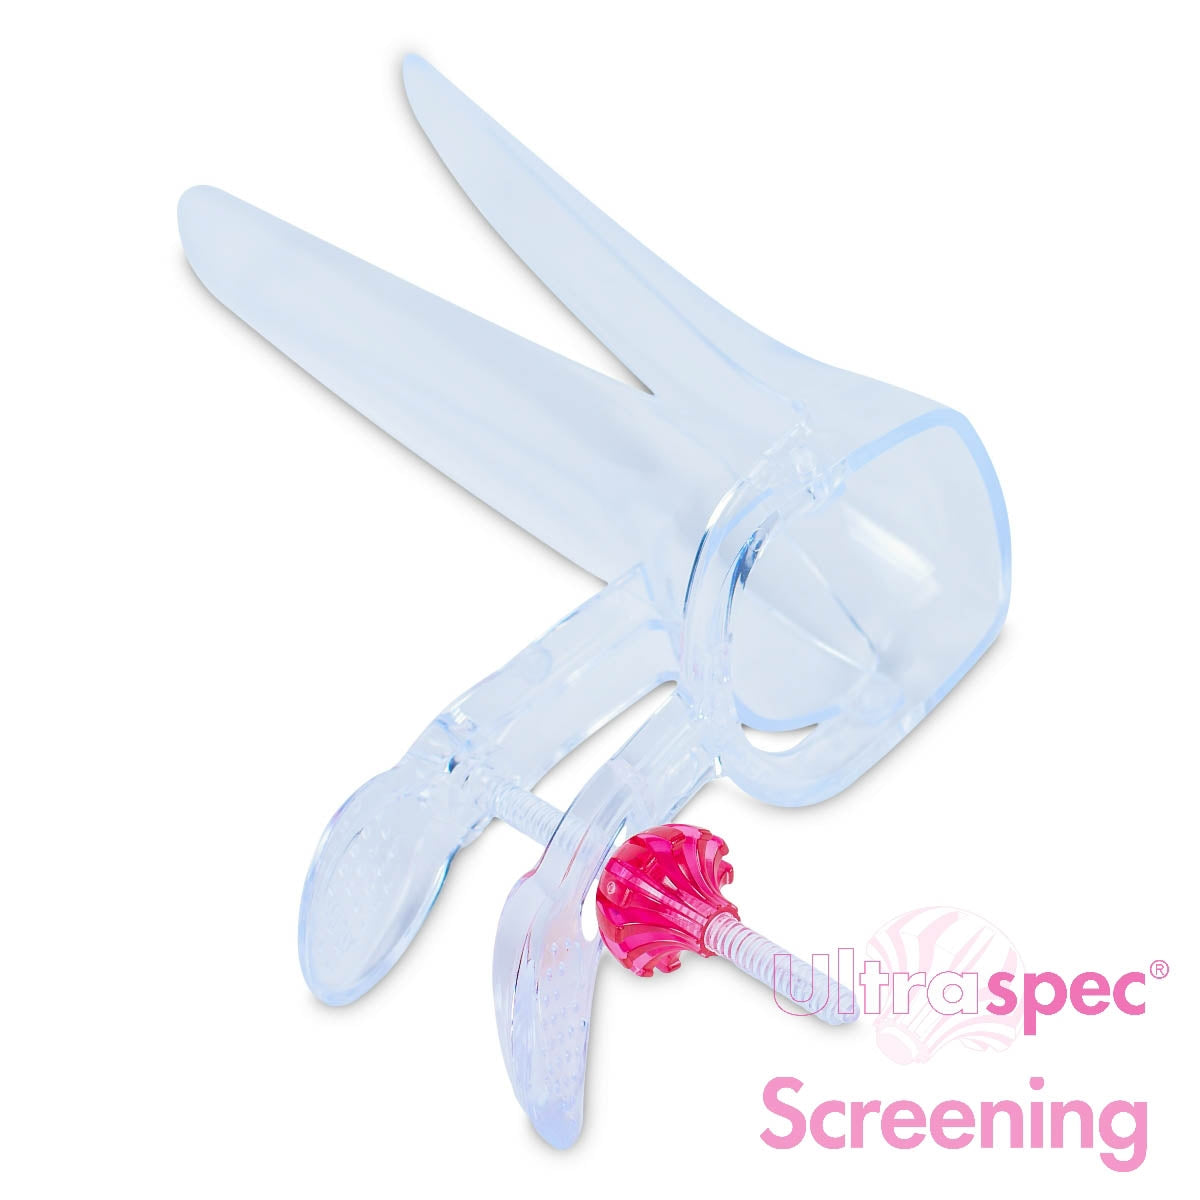 Speculum Ultraspec Extra Small - (Sterile) - Pack of 25